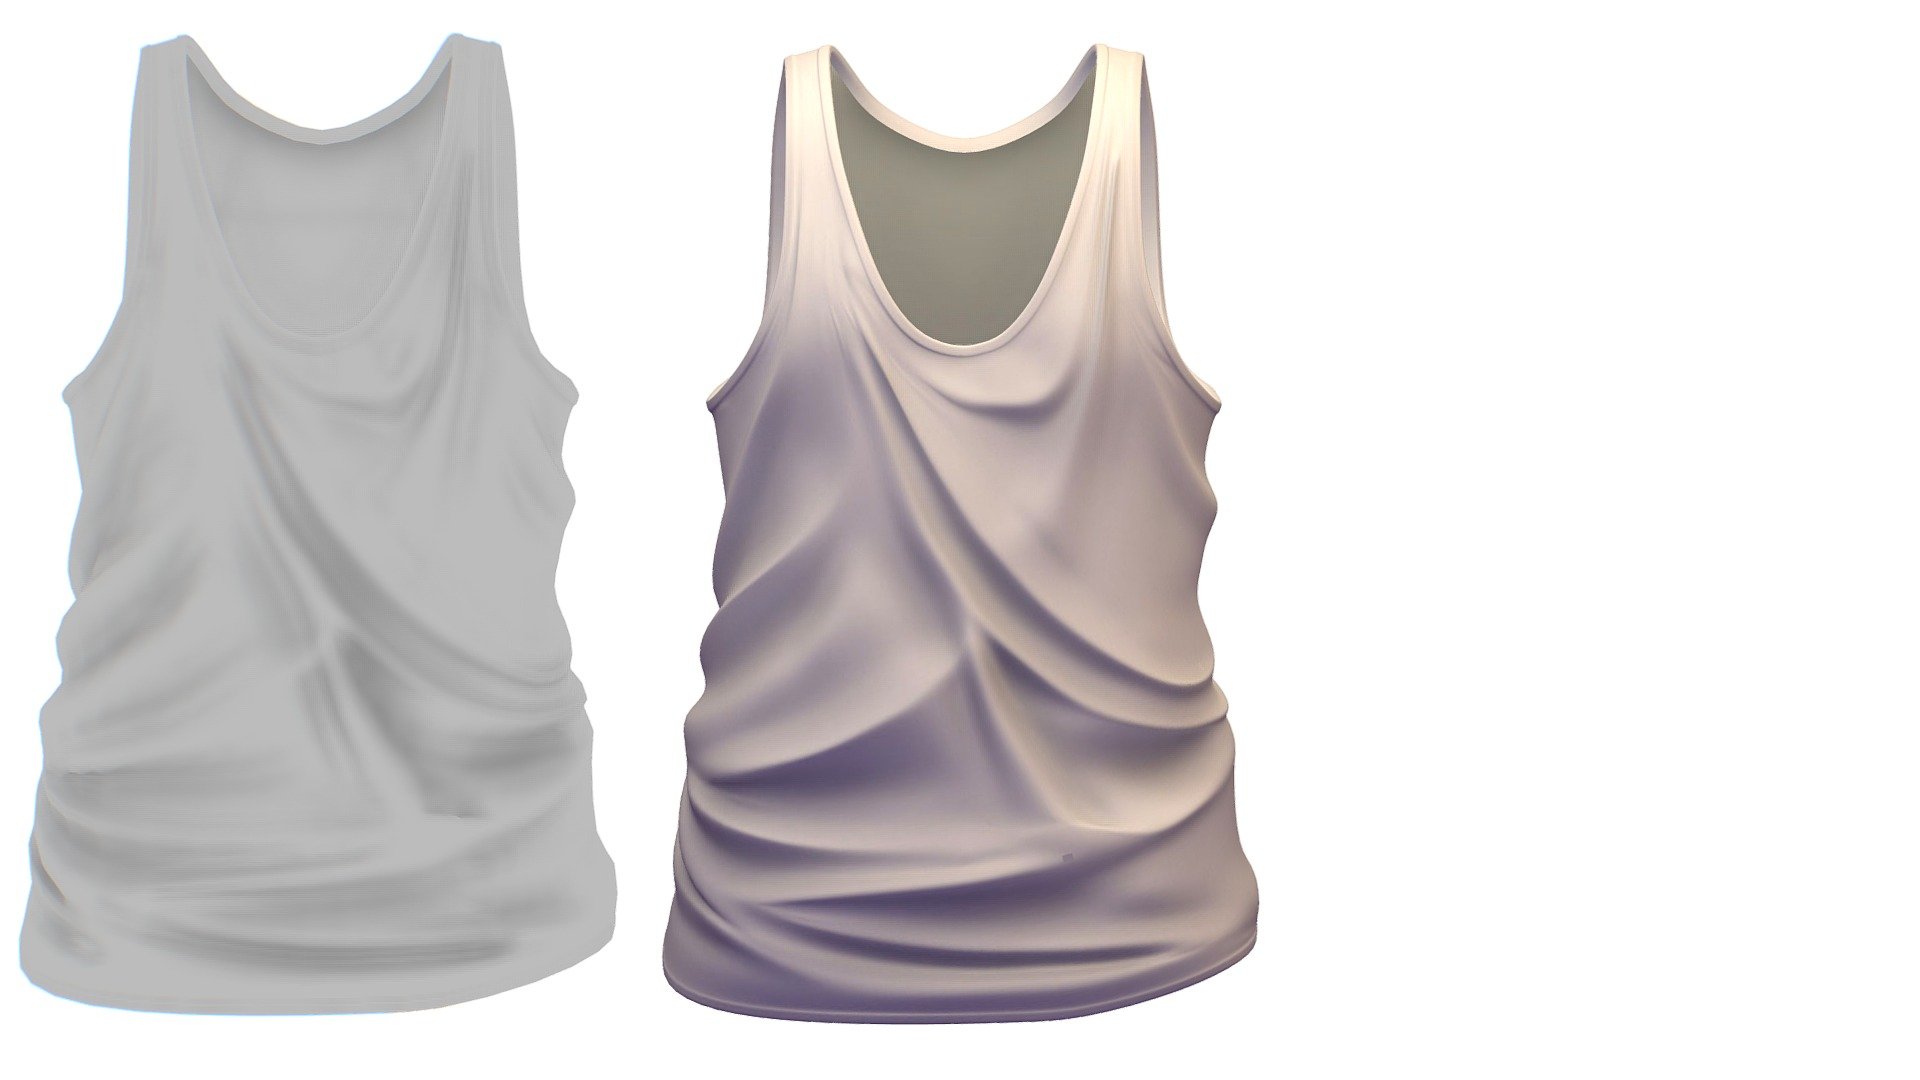 Cartoon High Poly Subdivision White T-shirt

No HDRI map, No Light, No material settings - only Diffuse/Color Map Texture (2500х2500)

More information about the 3D model: please use the Sketchfab Model Inspector - Key (i) - Cartoon High Poly Subdivision White T-shirt - Buy Royalty Free 3D model by Oleg Shuldiakov (@olegshuldiakov) 3d model